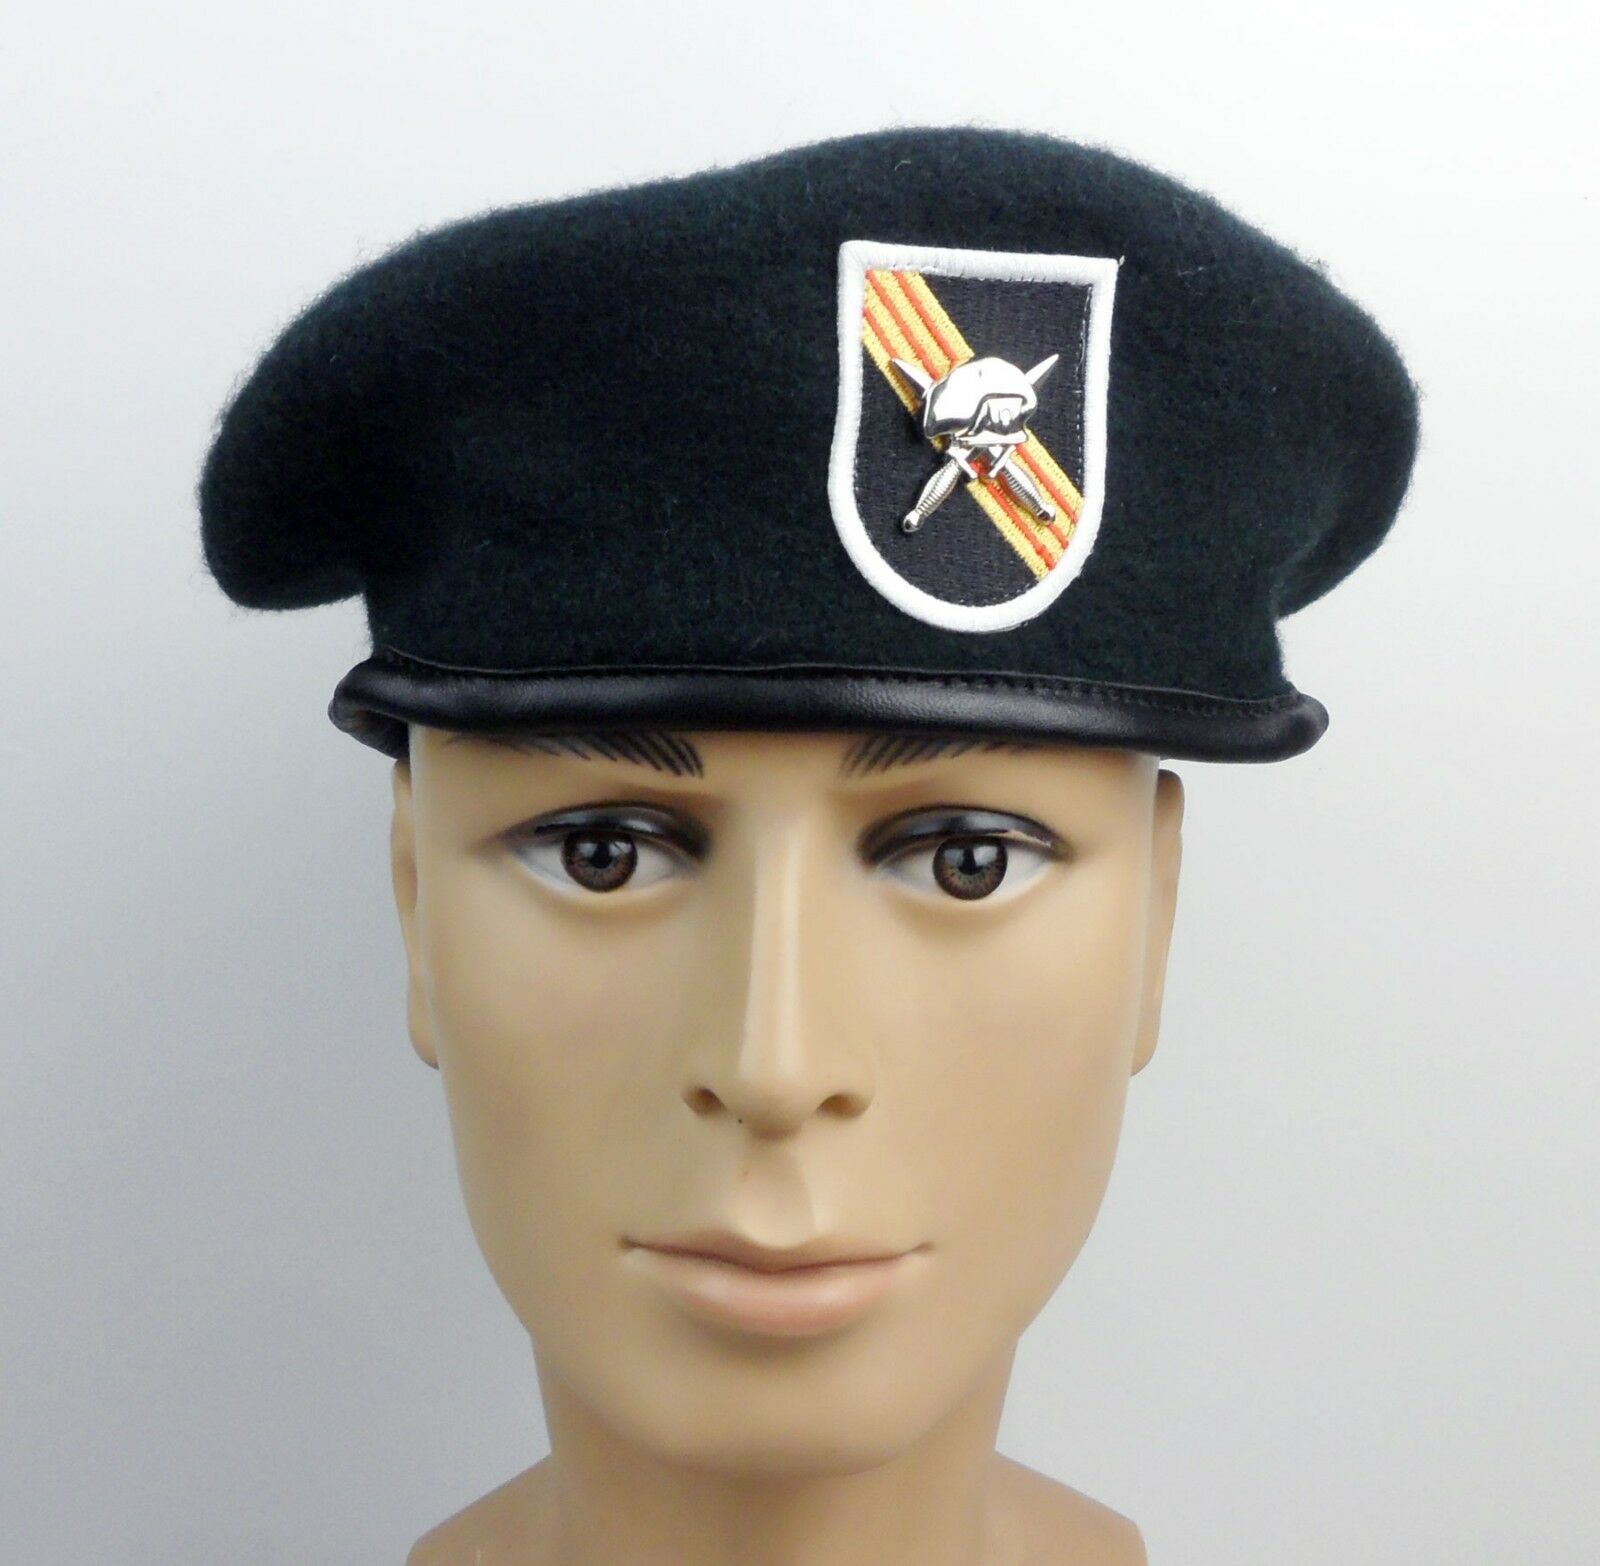 . US ARMY SPECIAL FORCES GREEN BERET HAT & SPECIAL FORCES CAP BADGE - Women